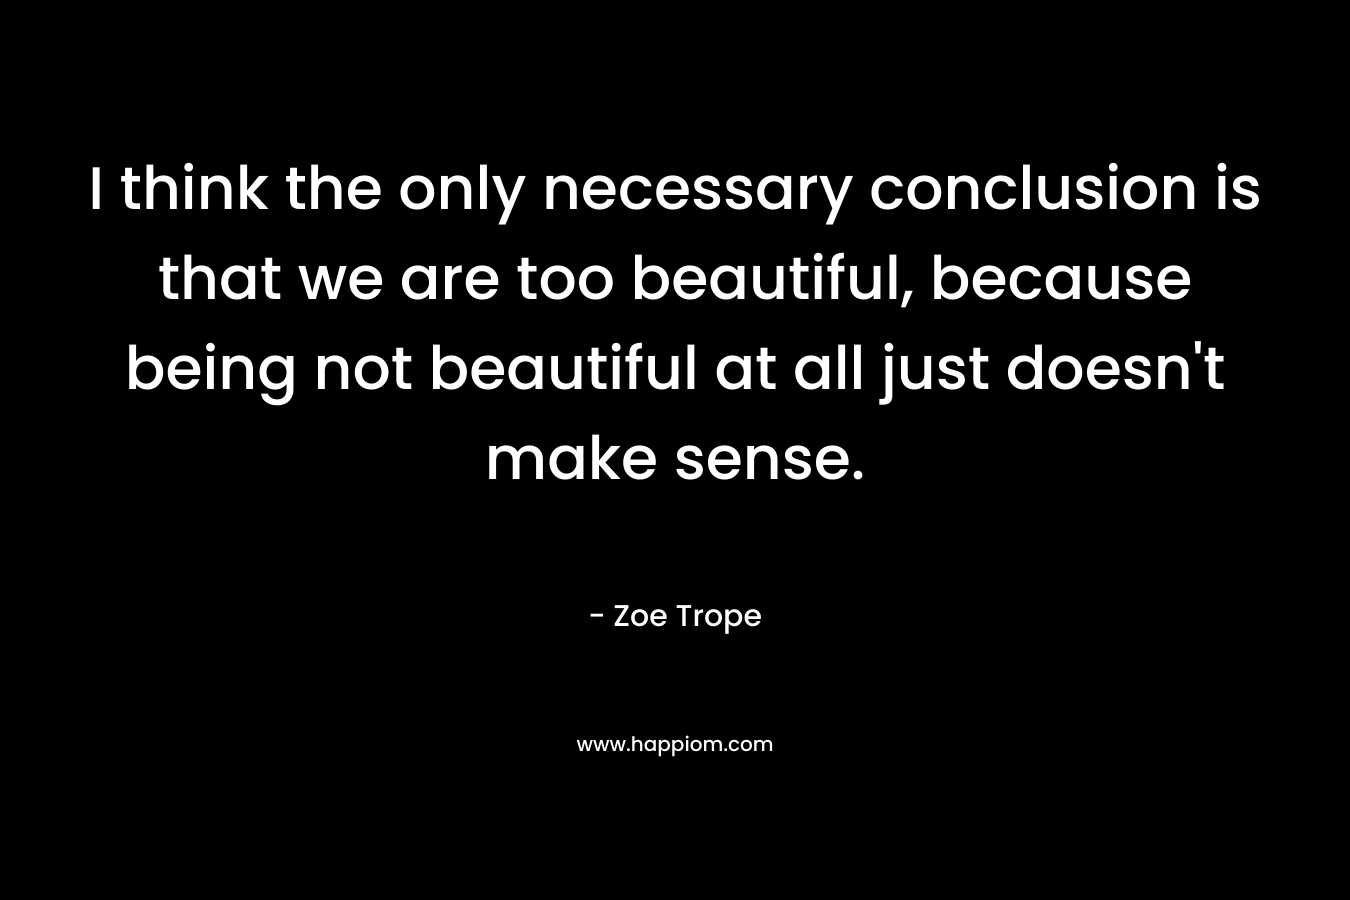 I think the only necessary conclusion is that we are too beautiful, because being not beautiful at all just doesn’t make sense. – Zoe Trope